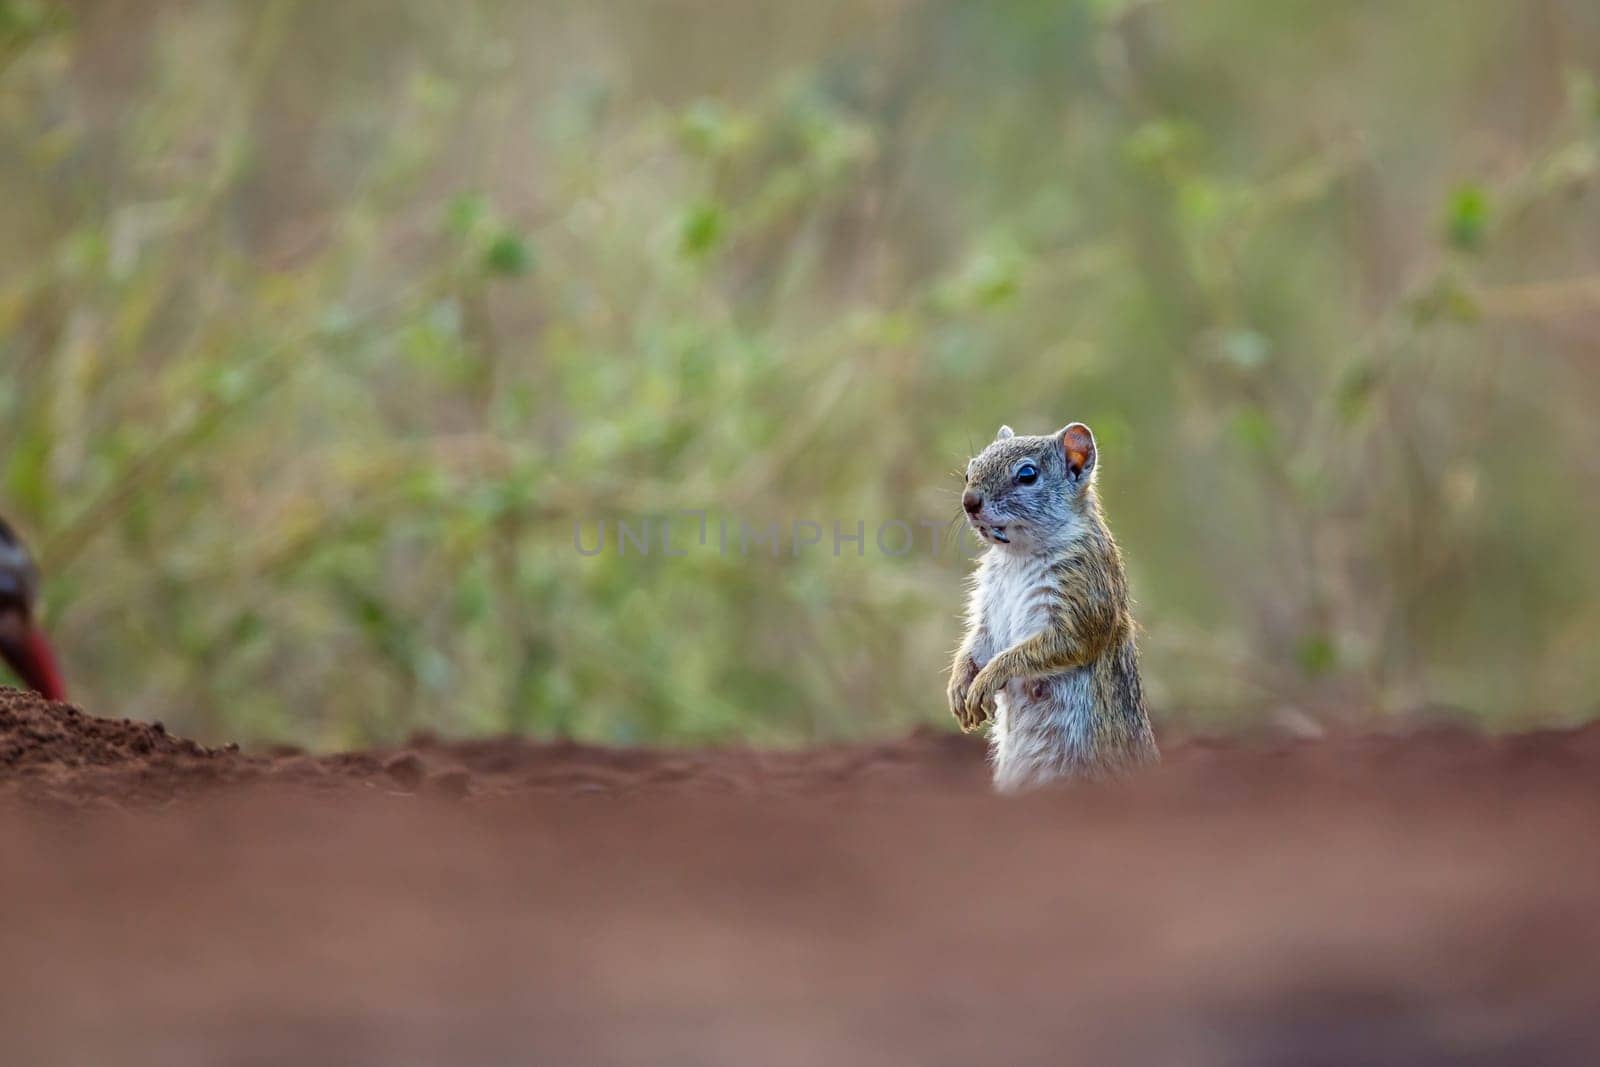 Smith bush squirrel in Kruger national park, South Africa by PACOCOMO